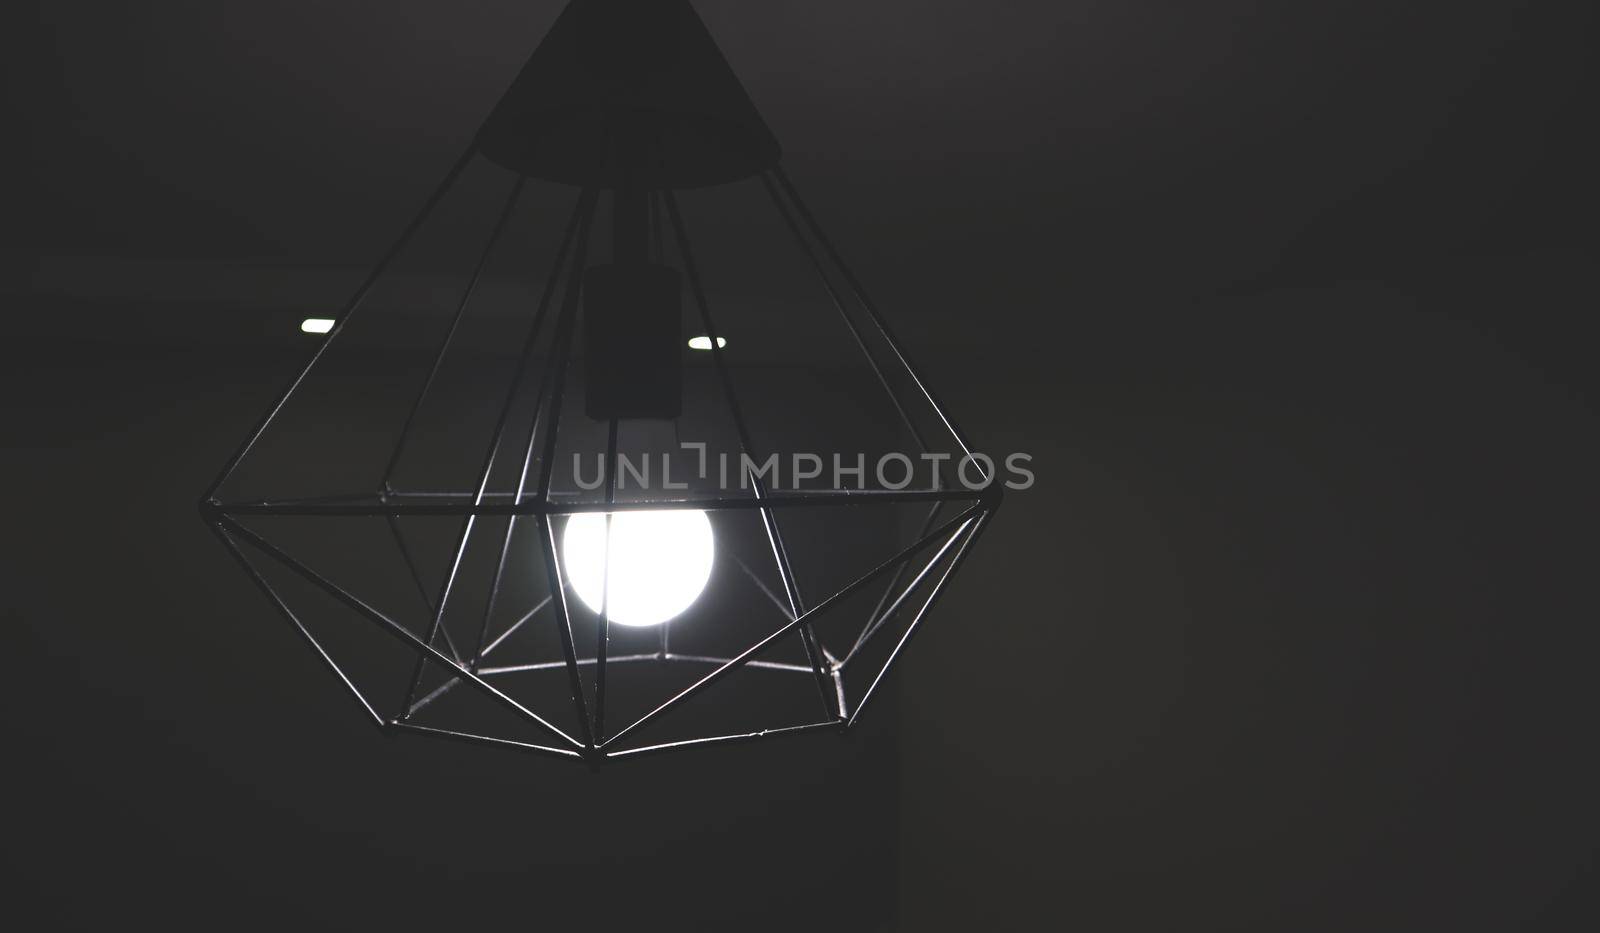 Chandelier with black iron rods on the ceiling in a room with a light bulb